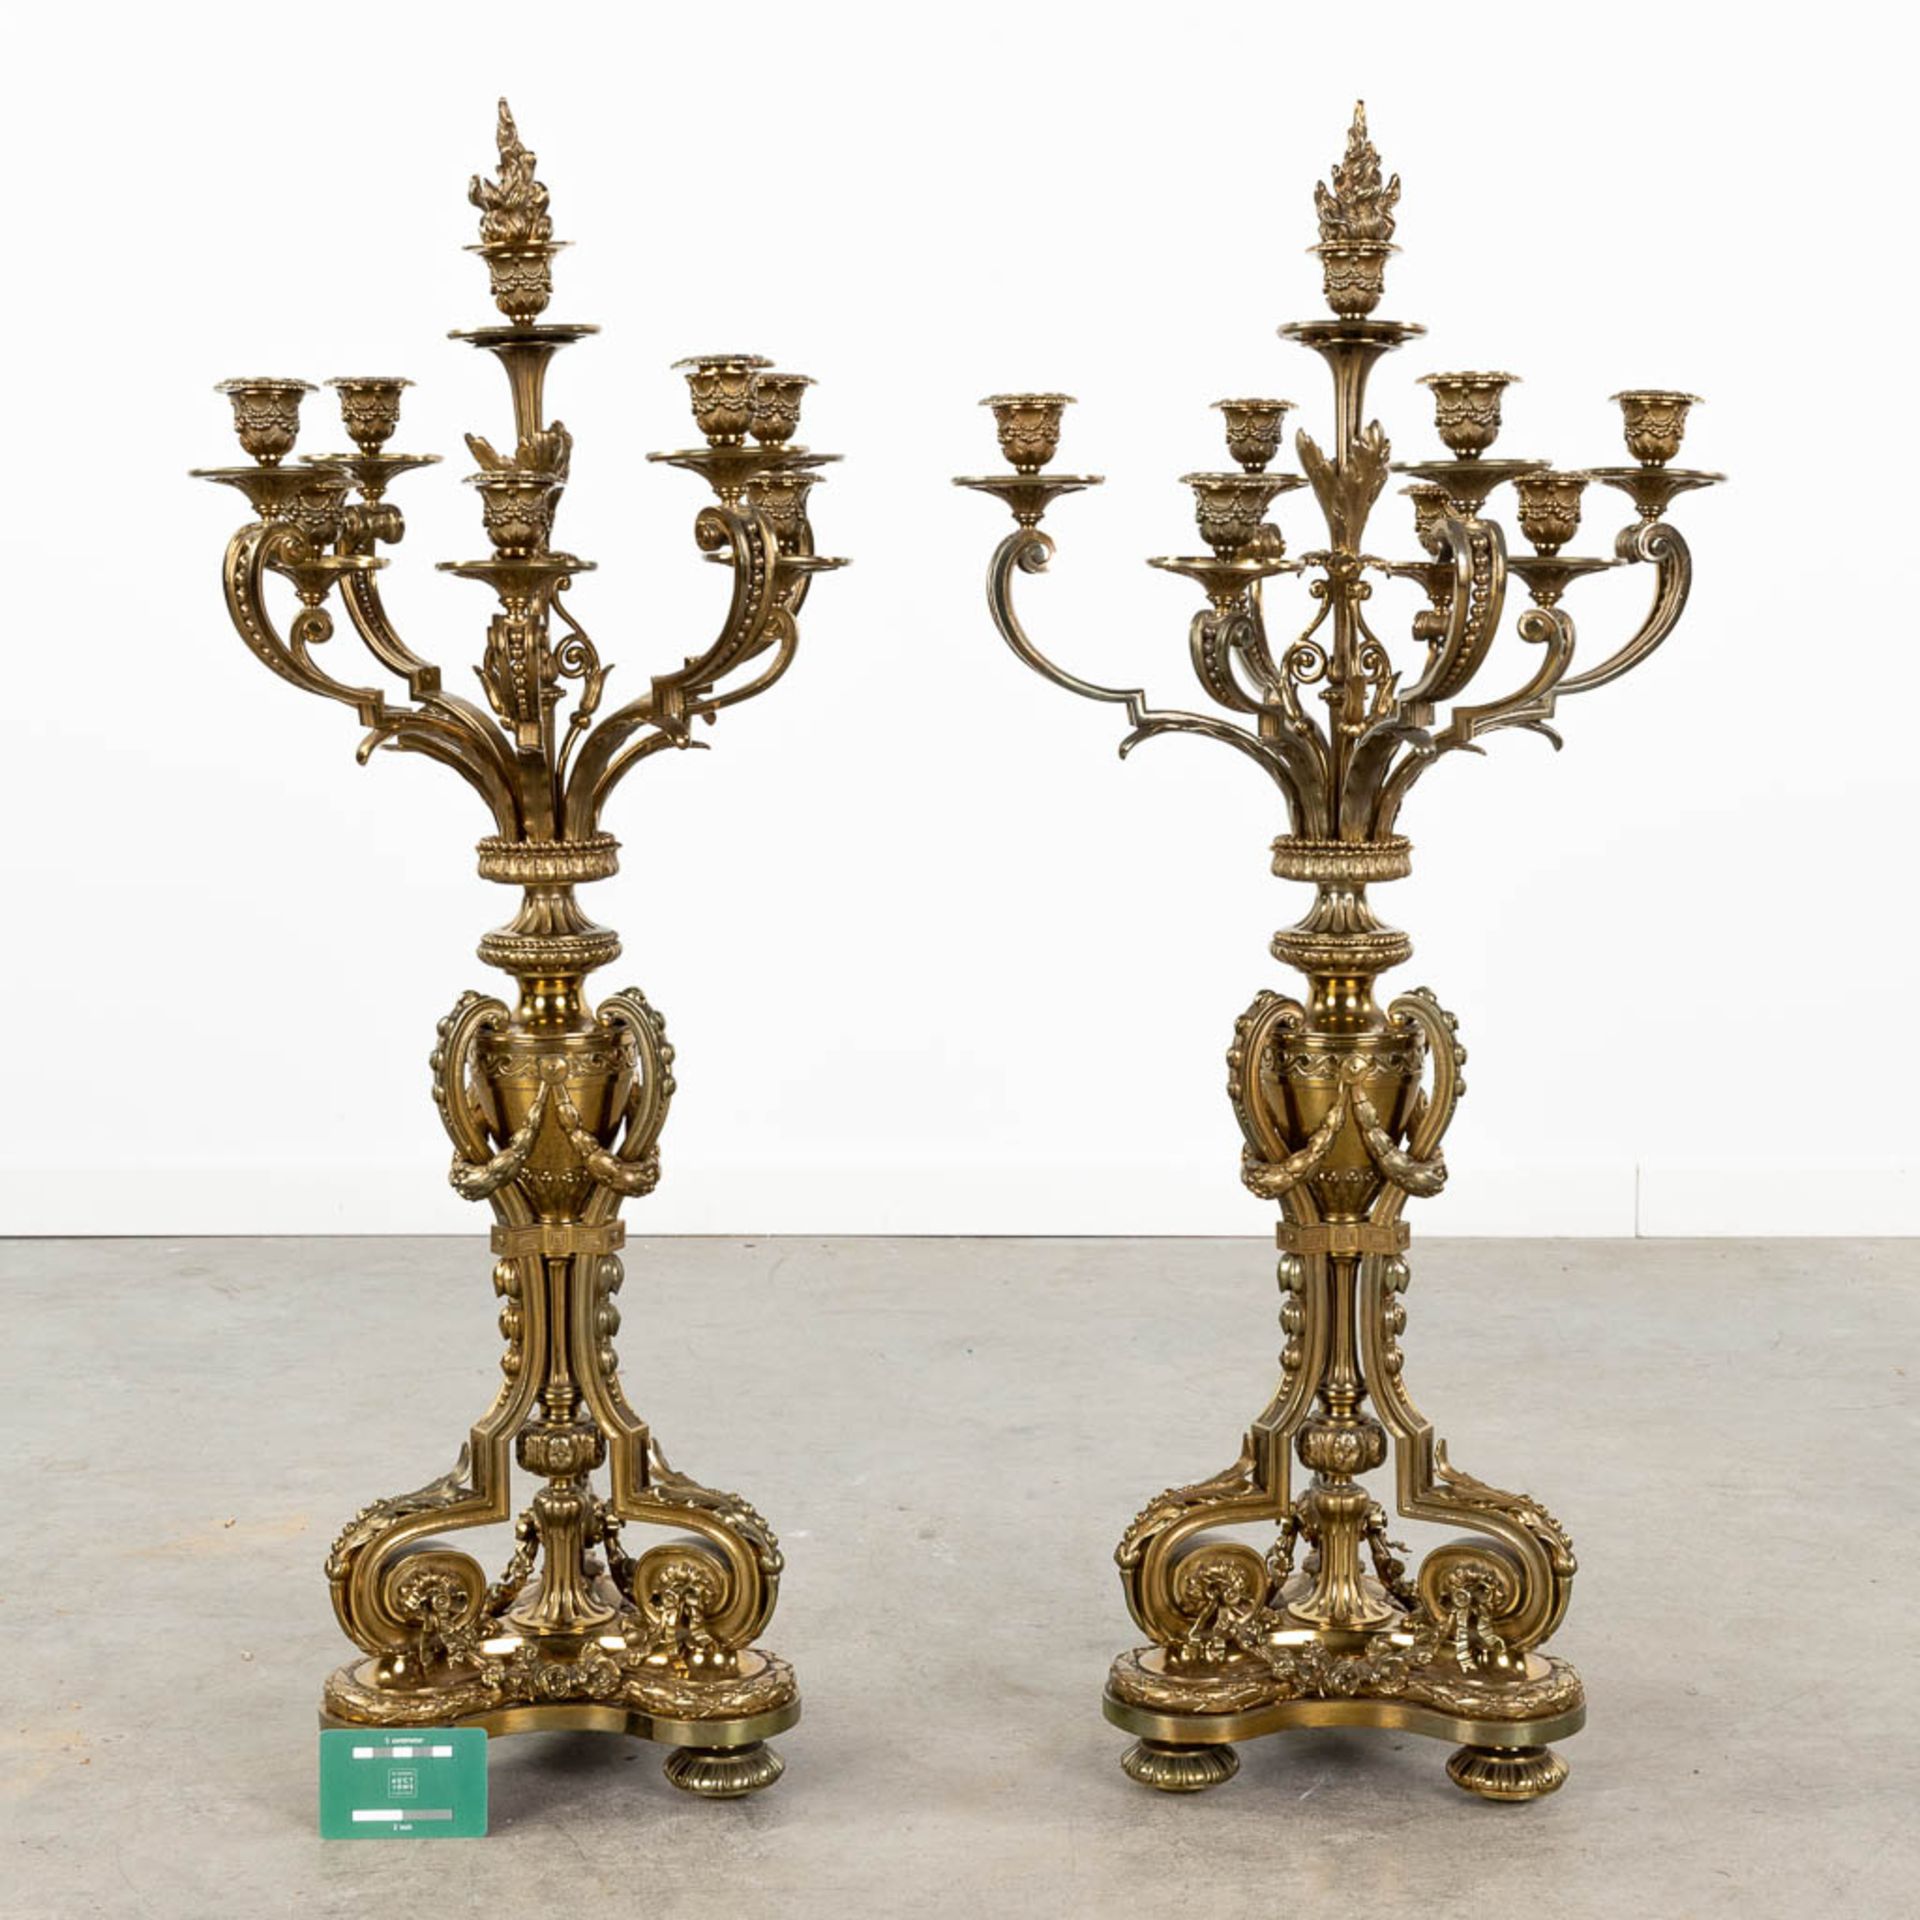 A pair of large neoclassical candelabra made of polished bronze. (L:30 x W:30 x H:90 x D:42,5 cm) - Image 2 of 12